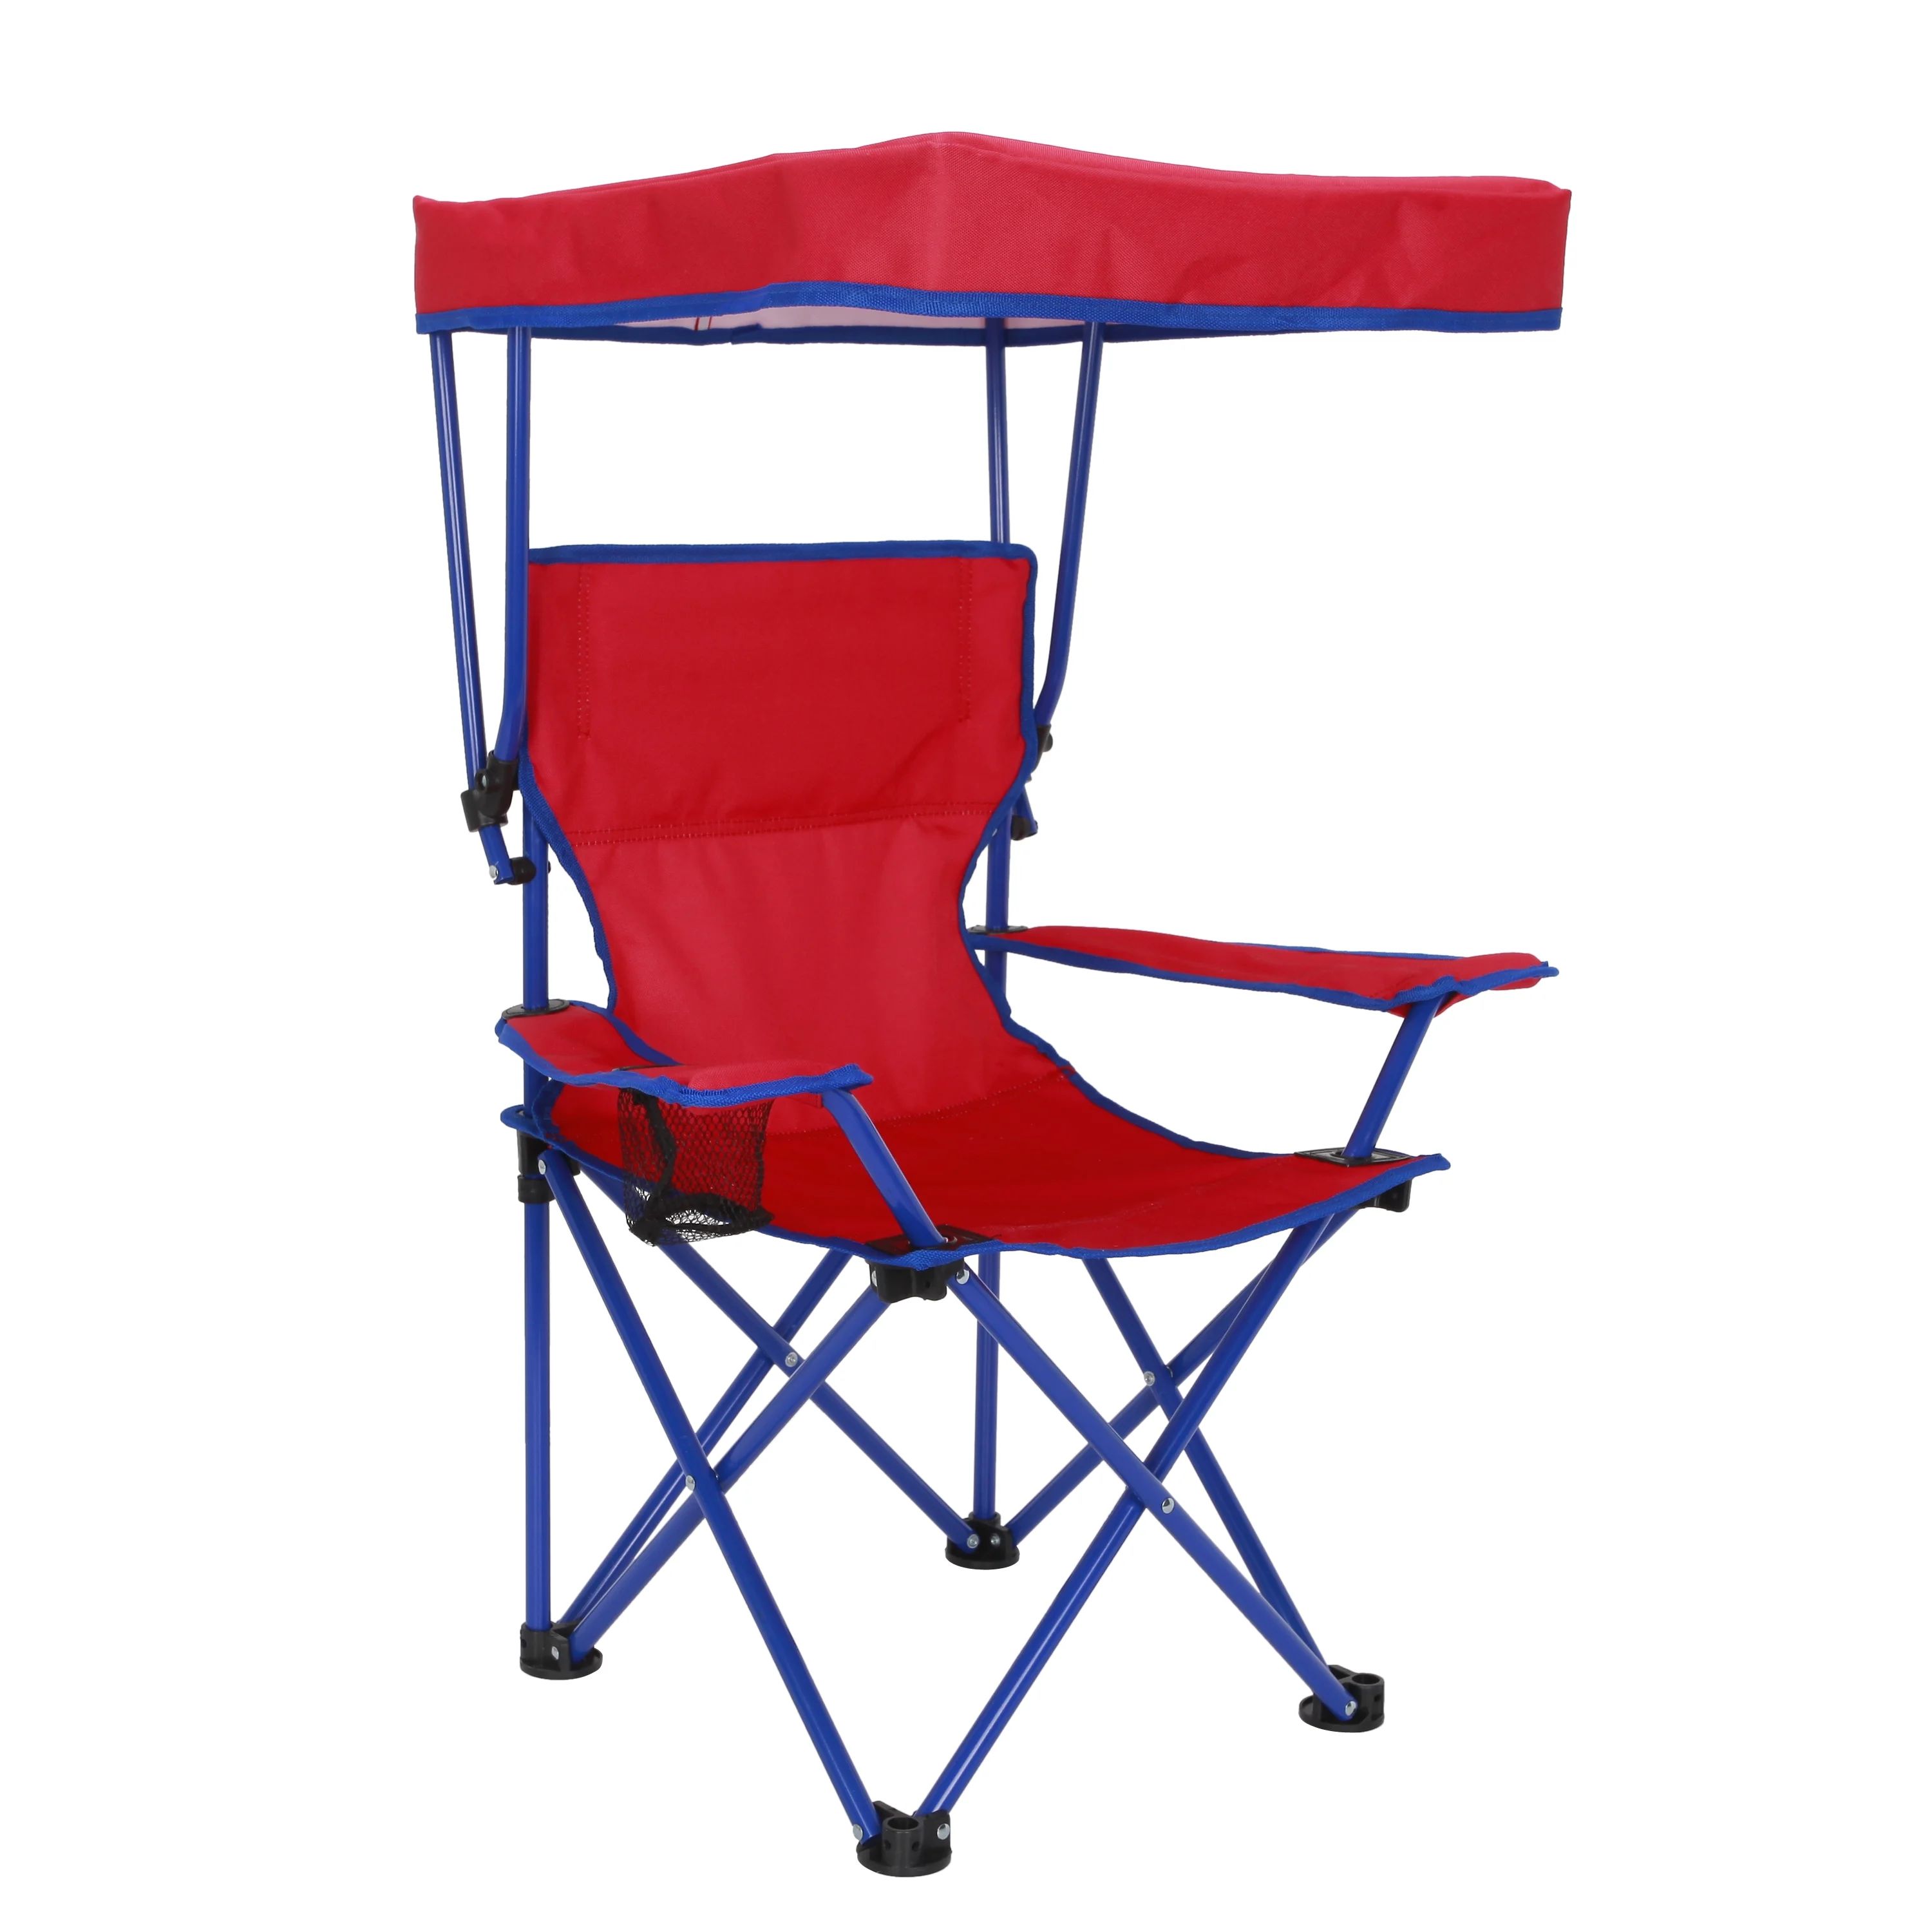 Ozark Trail Kids Canopy Chair with Safety Lock (125 lb. Capacity), Red/Blue | Walmart (US)